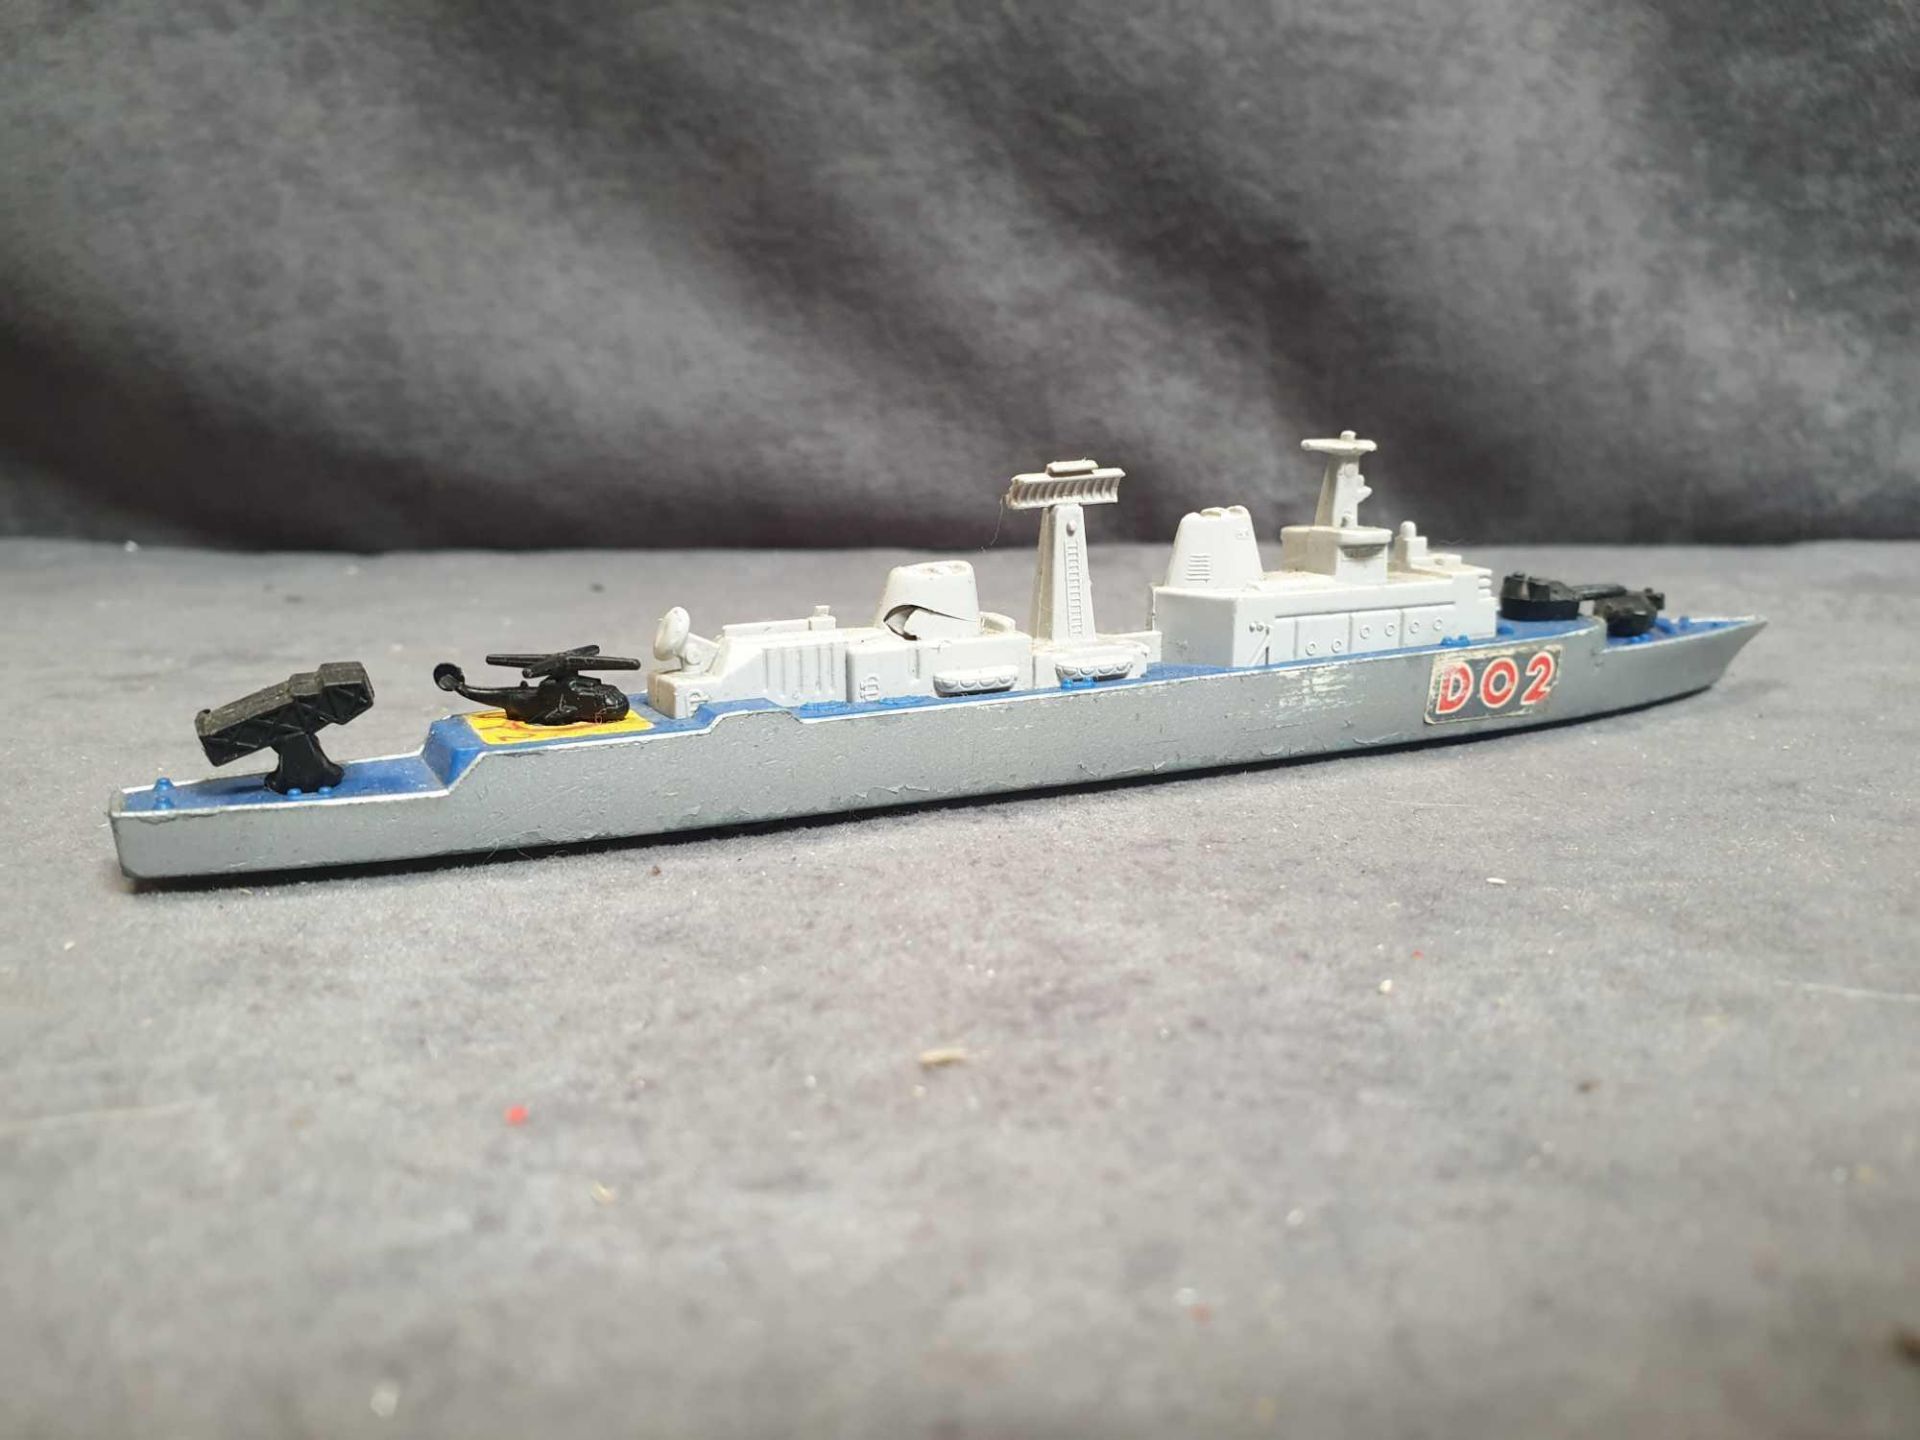 Matchbox Sea Kings Lesney K308 Guided Missile Destroyer Ship D02,1976 Diecast Unboxed - Image 4 of 4